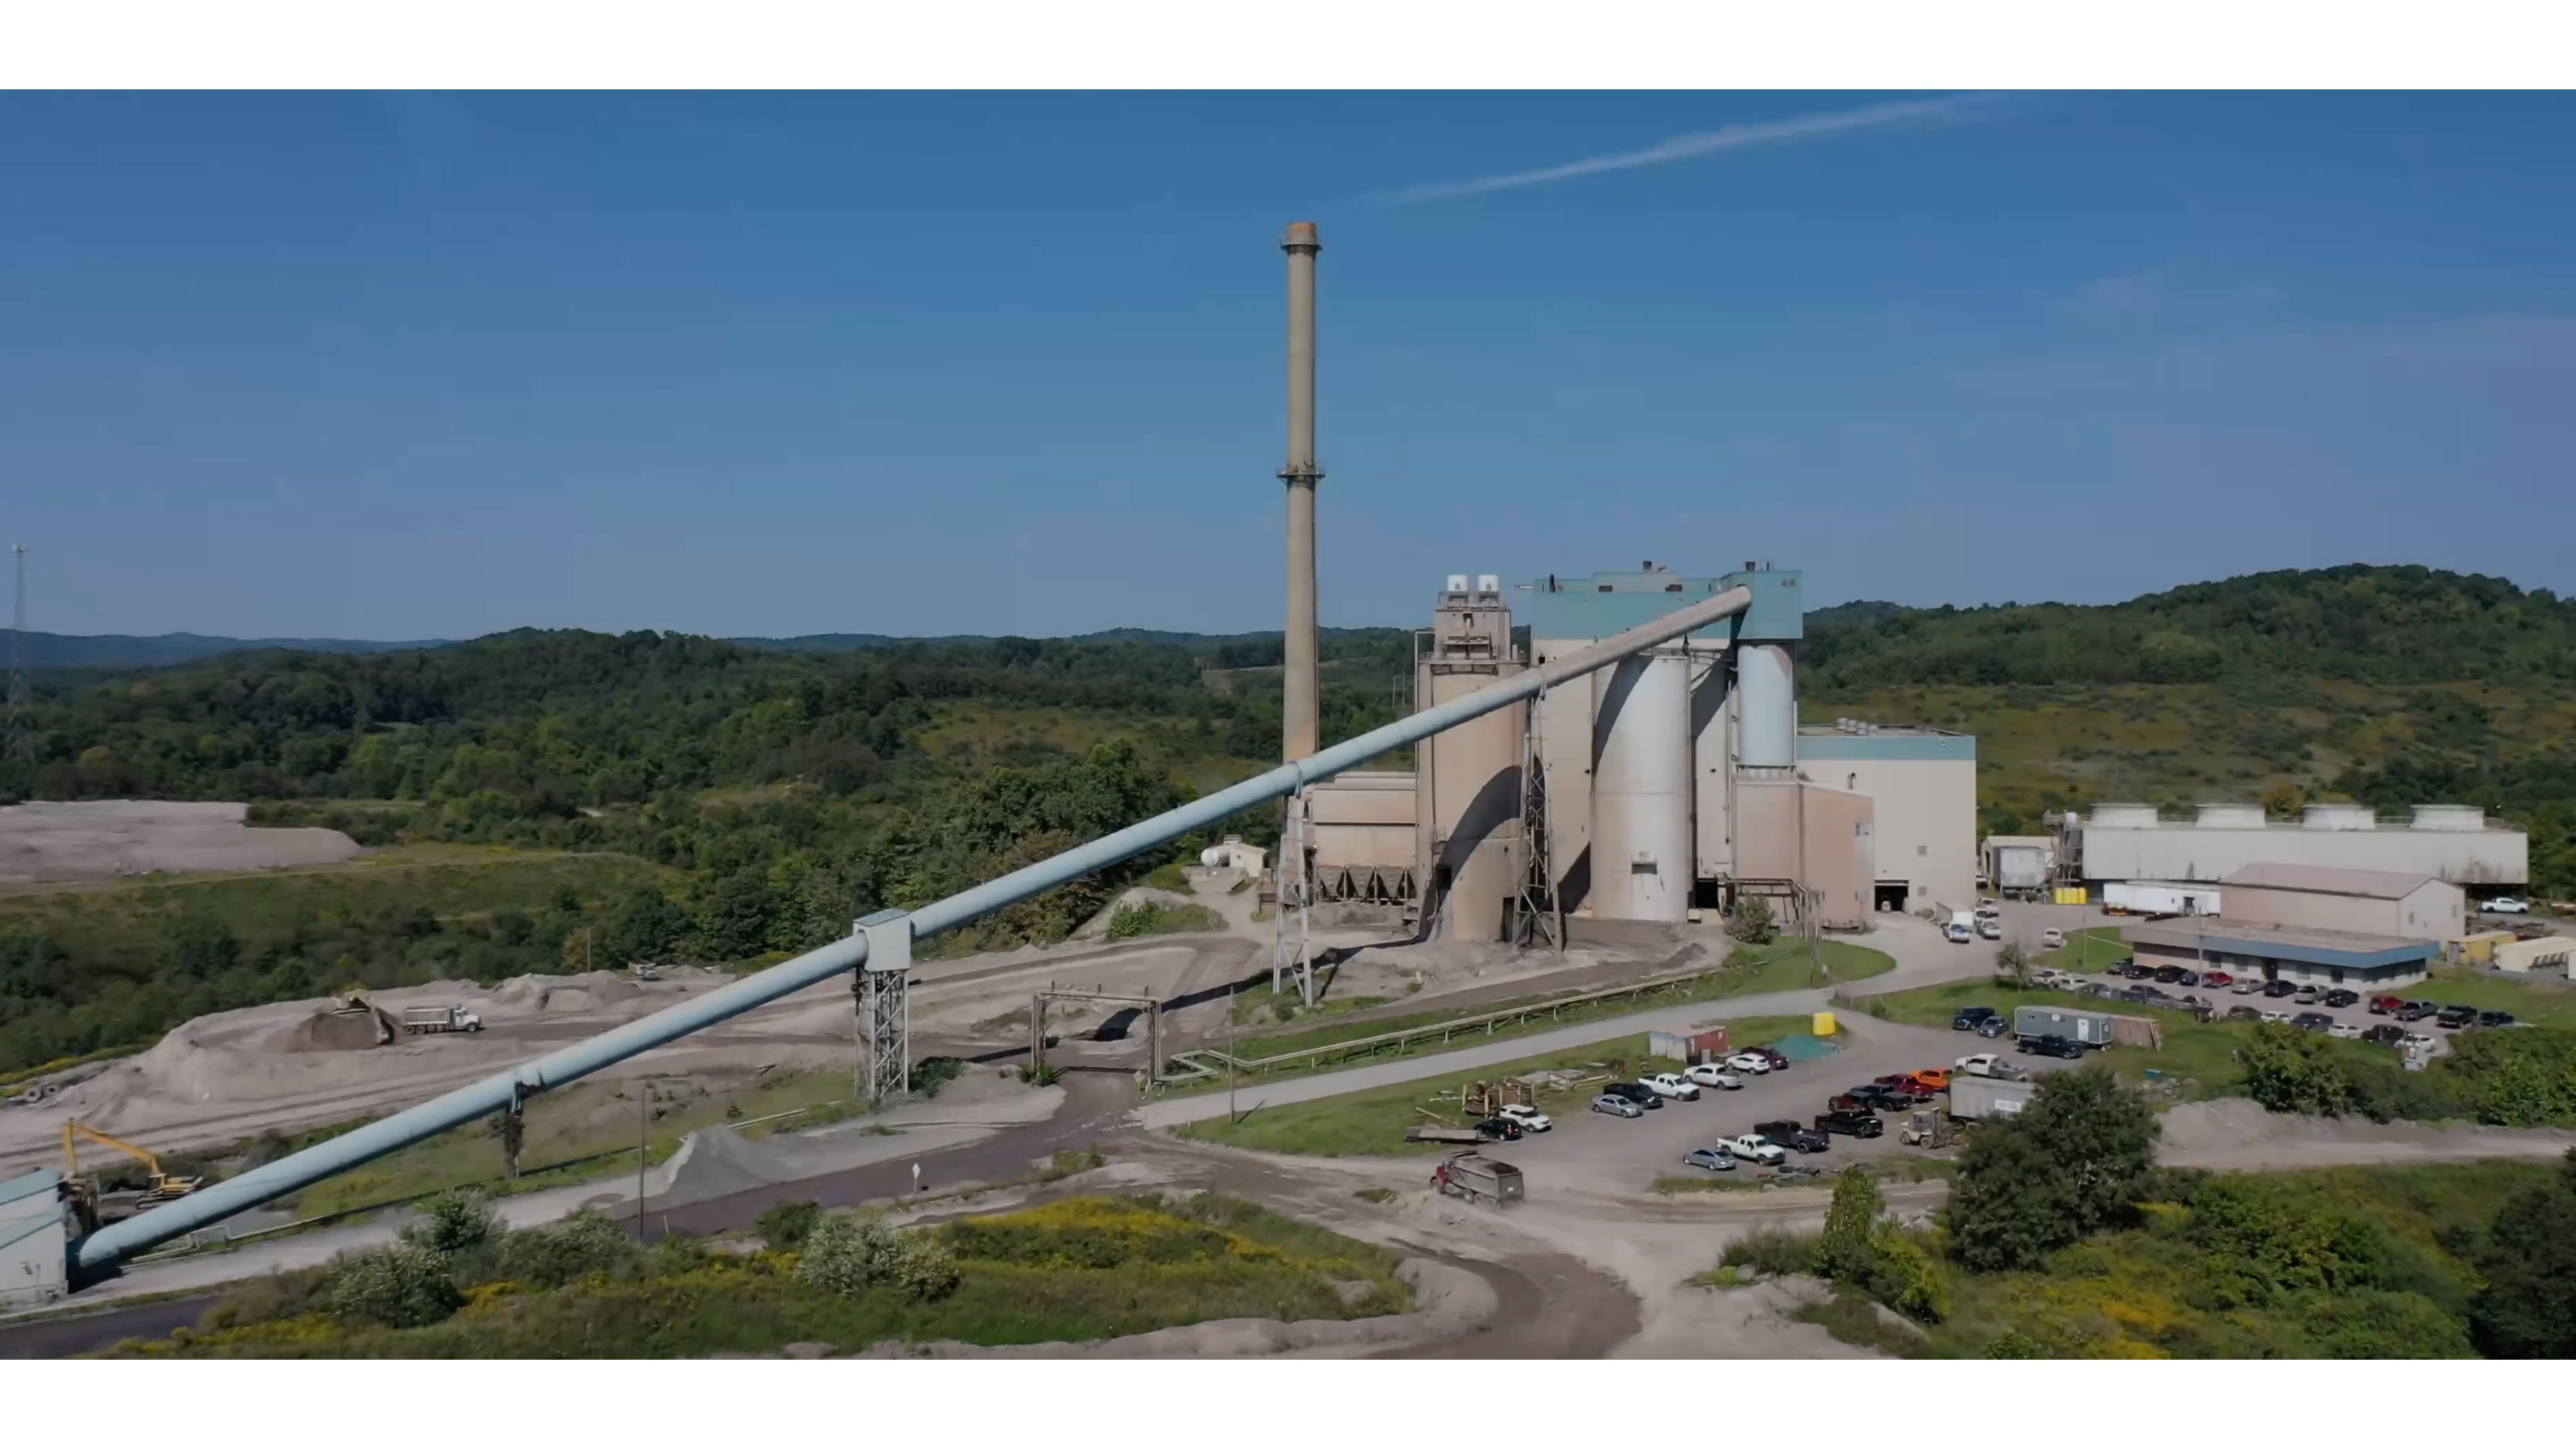 The partnership between American Bituminous Power and Gecko Robotics represents a significant step forward in the digitization of the power industry. By leveraging robots, data and AI, Grant Town Power Plant will be able to improve the efficiency and reliability of its operations while also reducing costs.